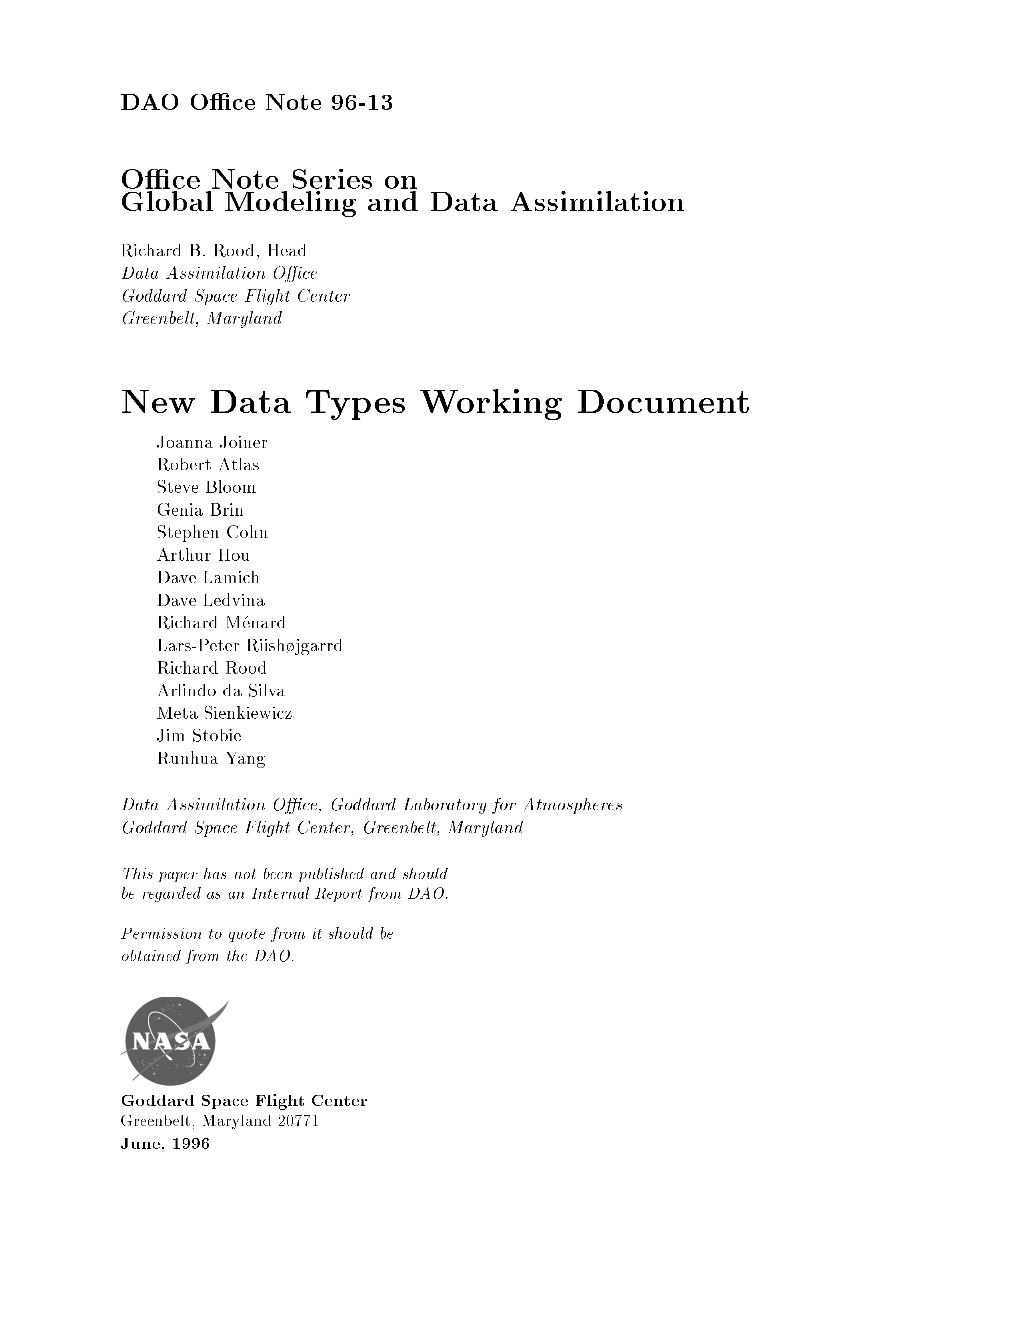 New Data Types Working Document